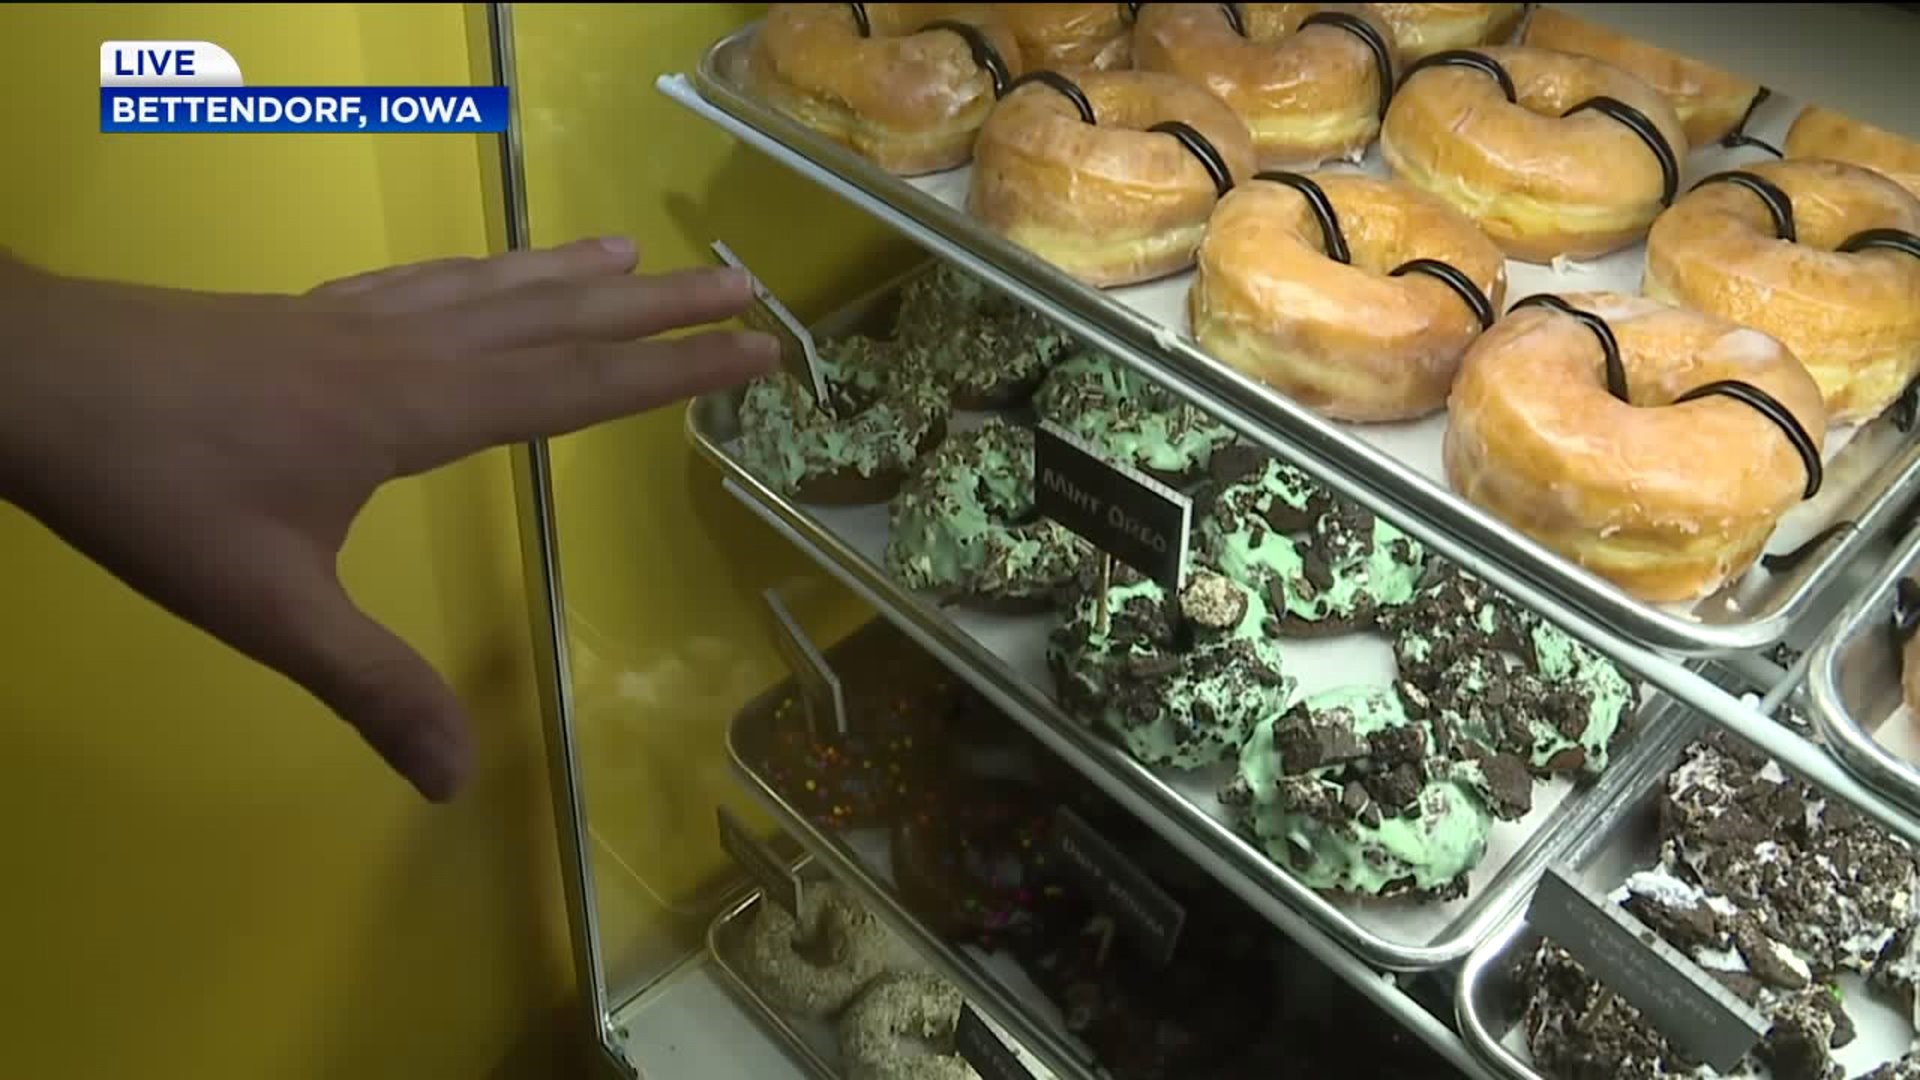 Davenport firefighters help make donuts for Clinton FD fundraiser